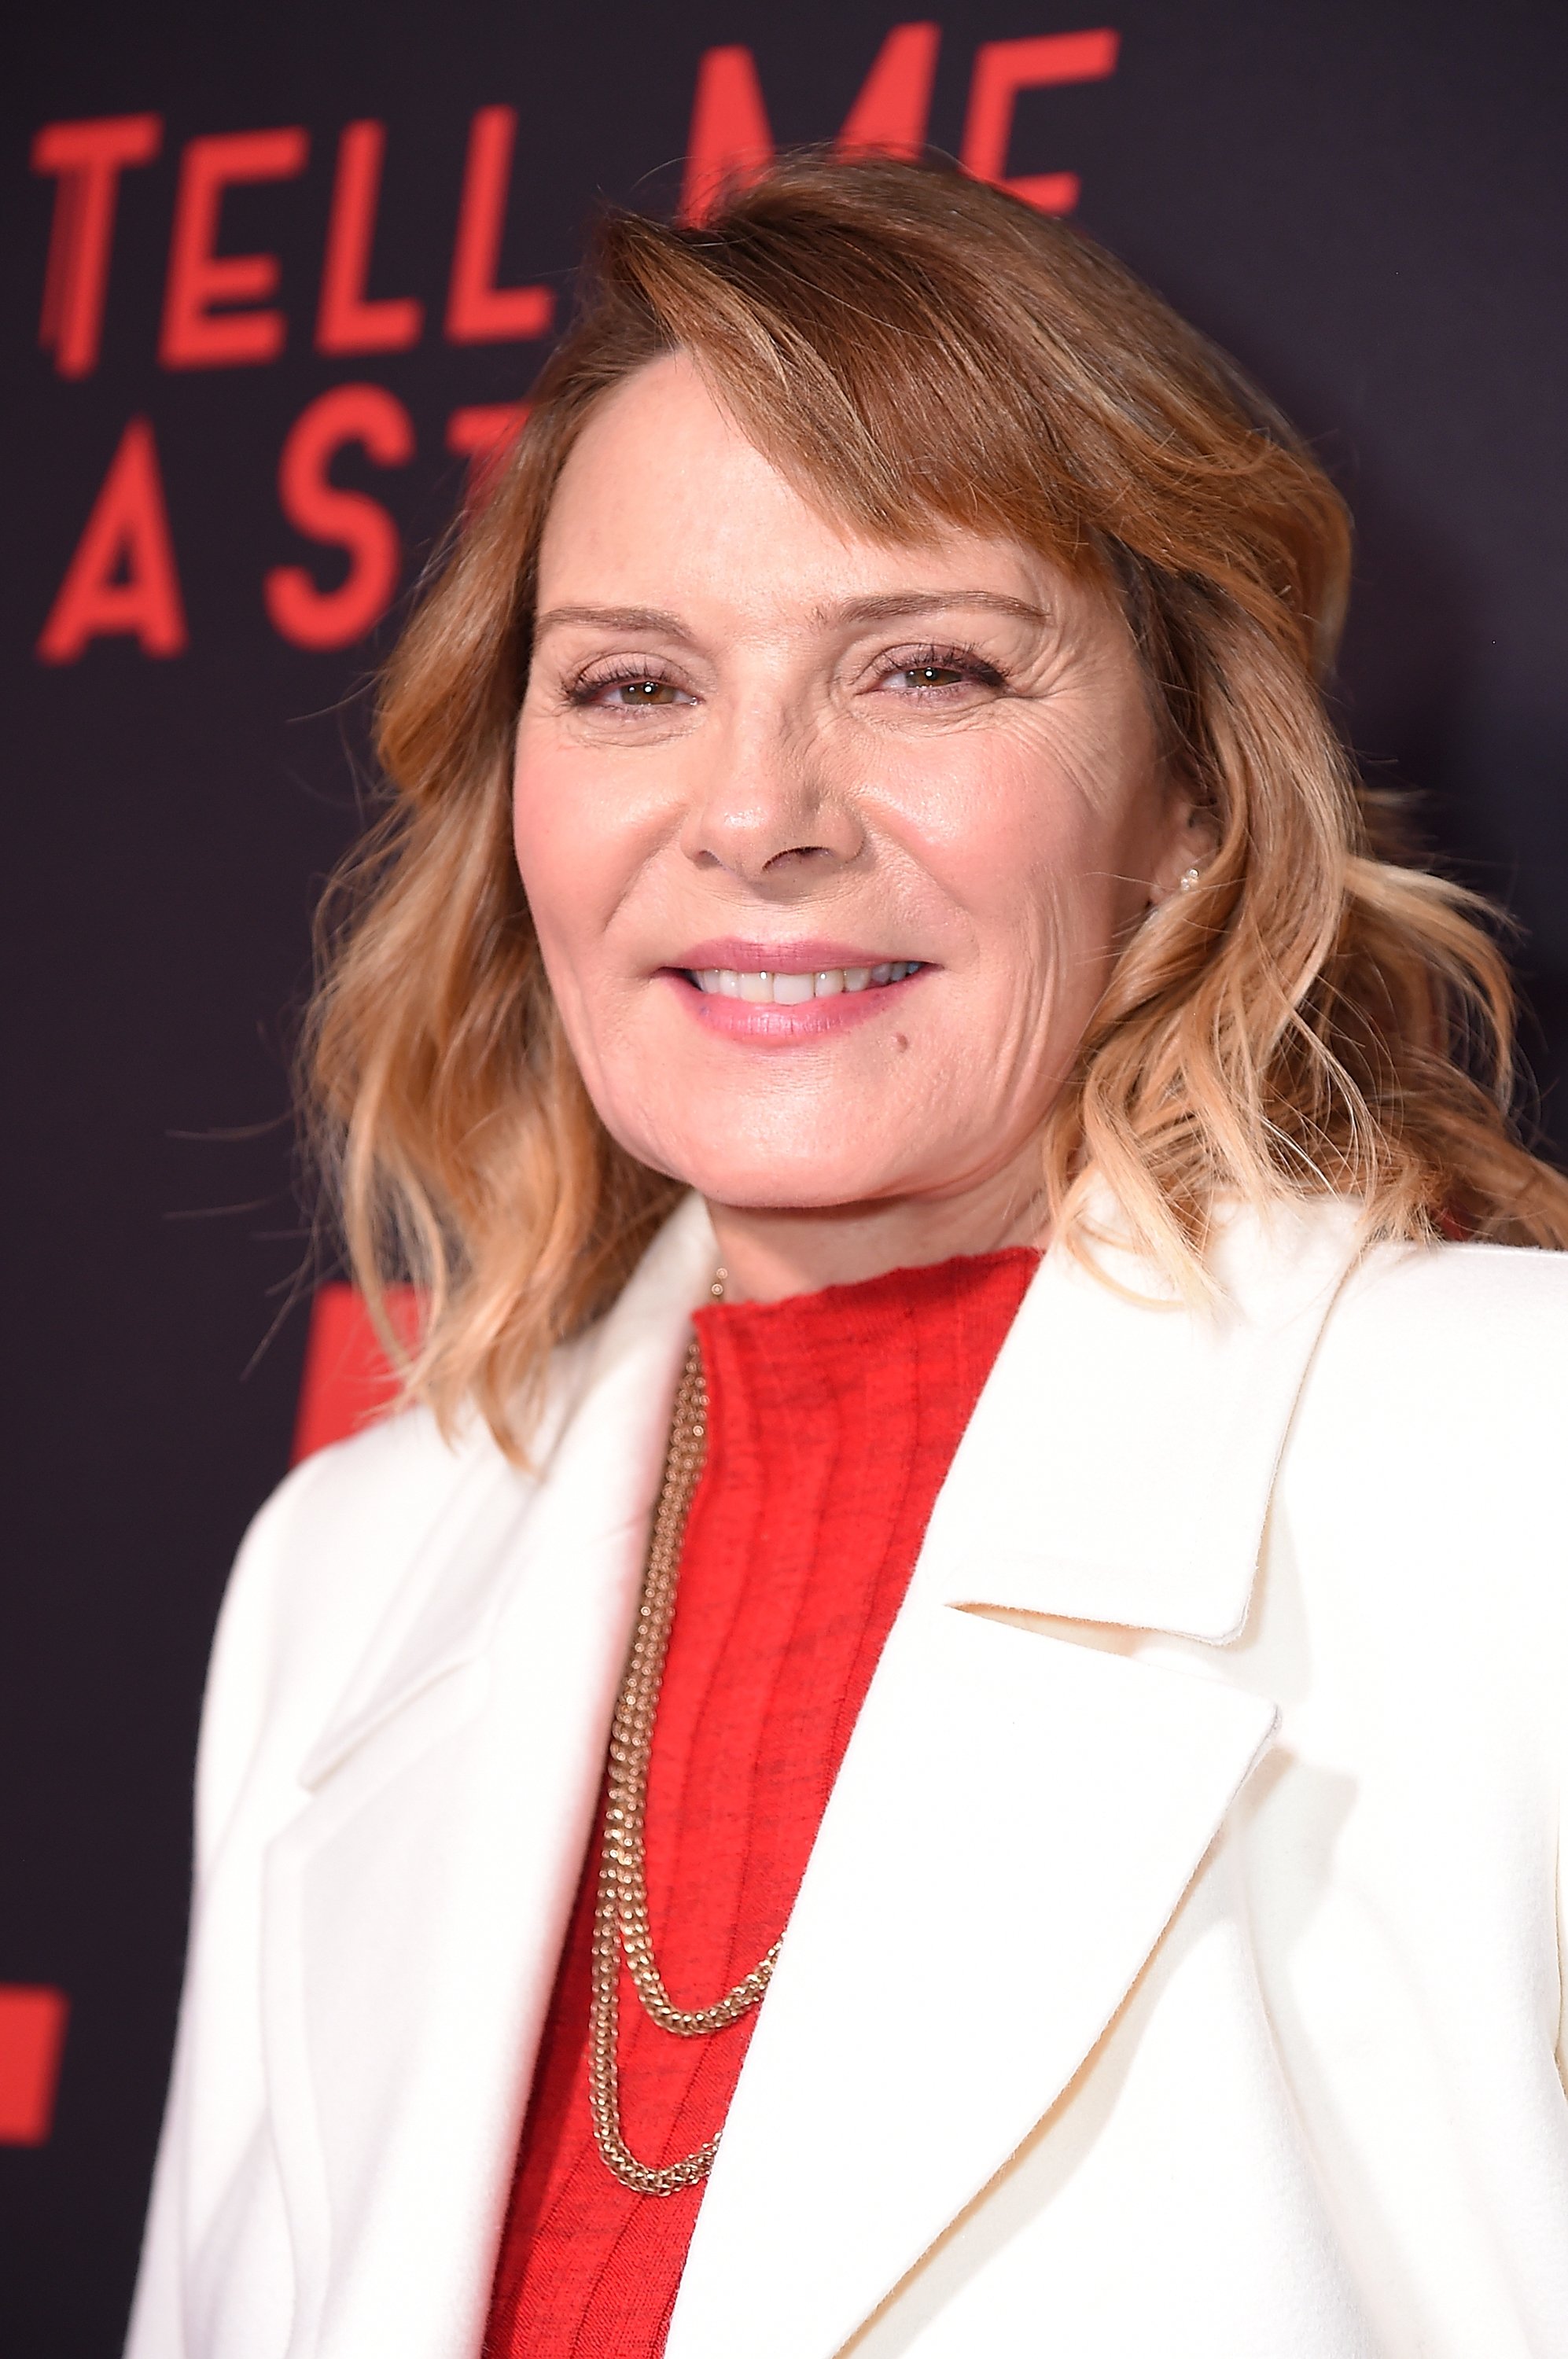 Kim Cattrall attends the New York premiere of CBS All Access' "Tell Me A Story" on October 23, 2018, in New York City. | Source: Getty Images.